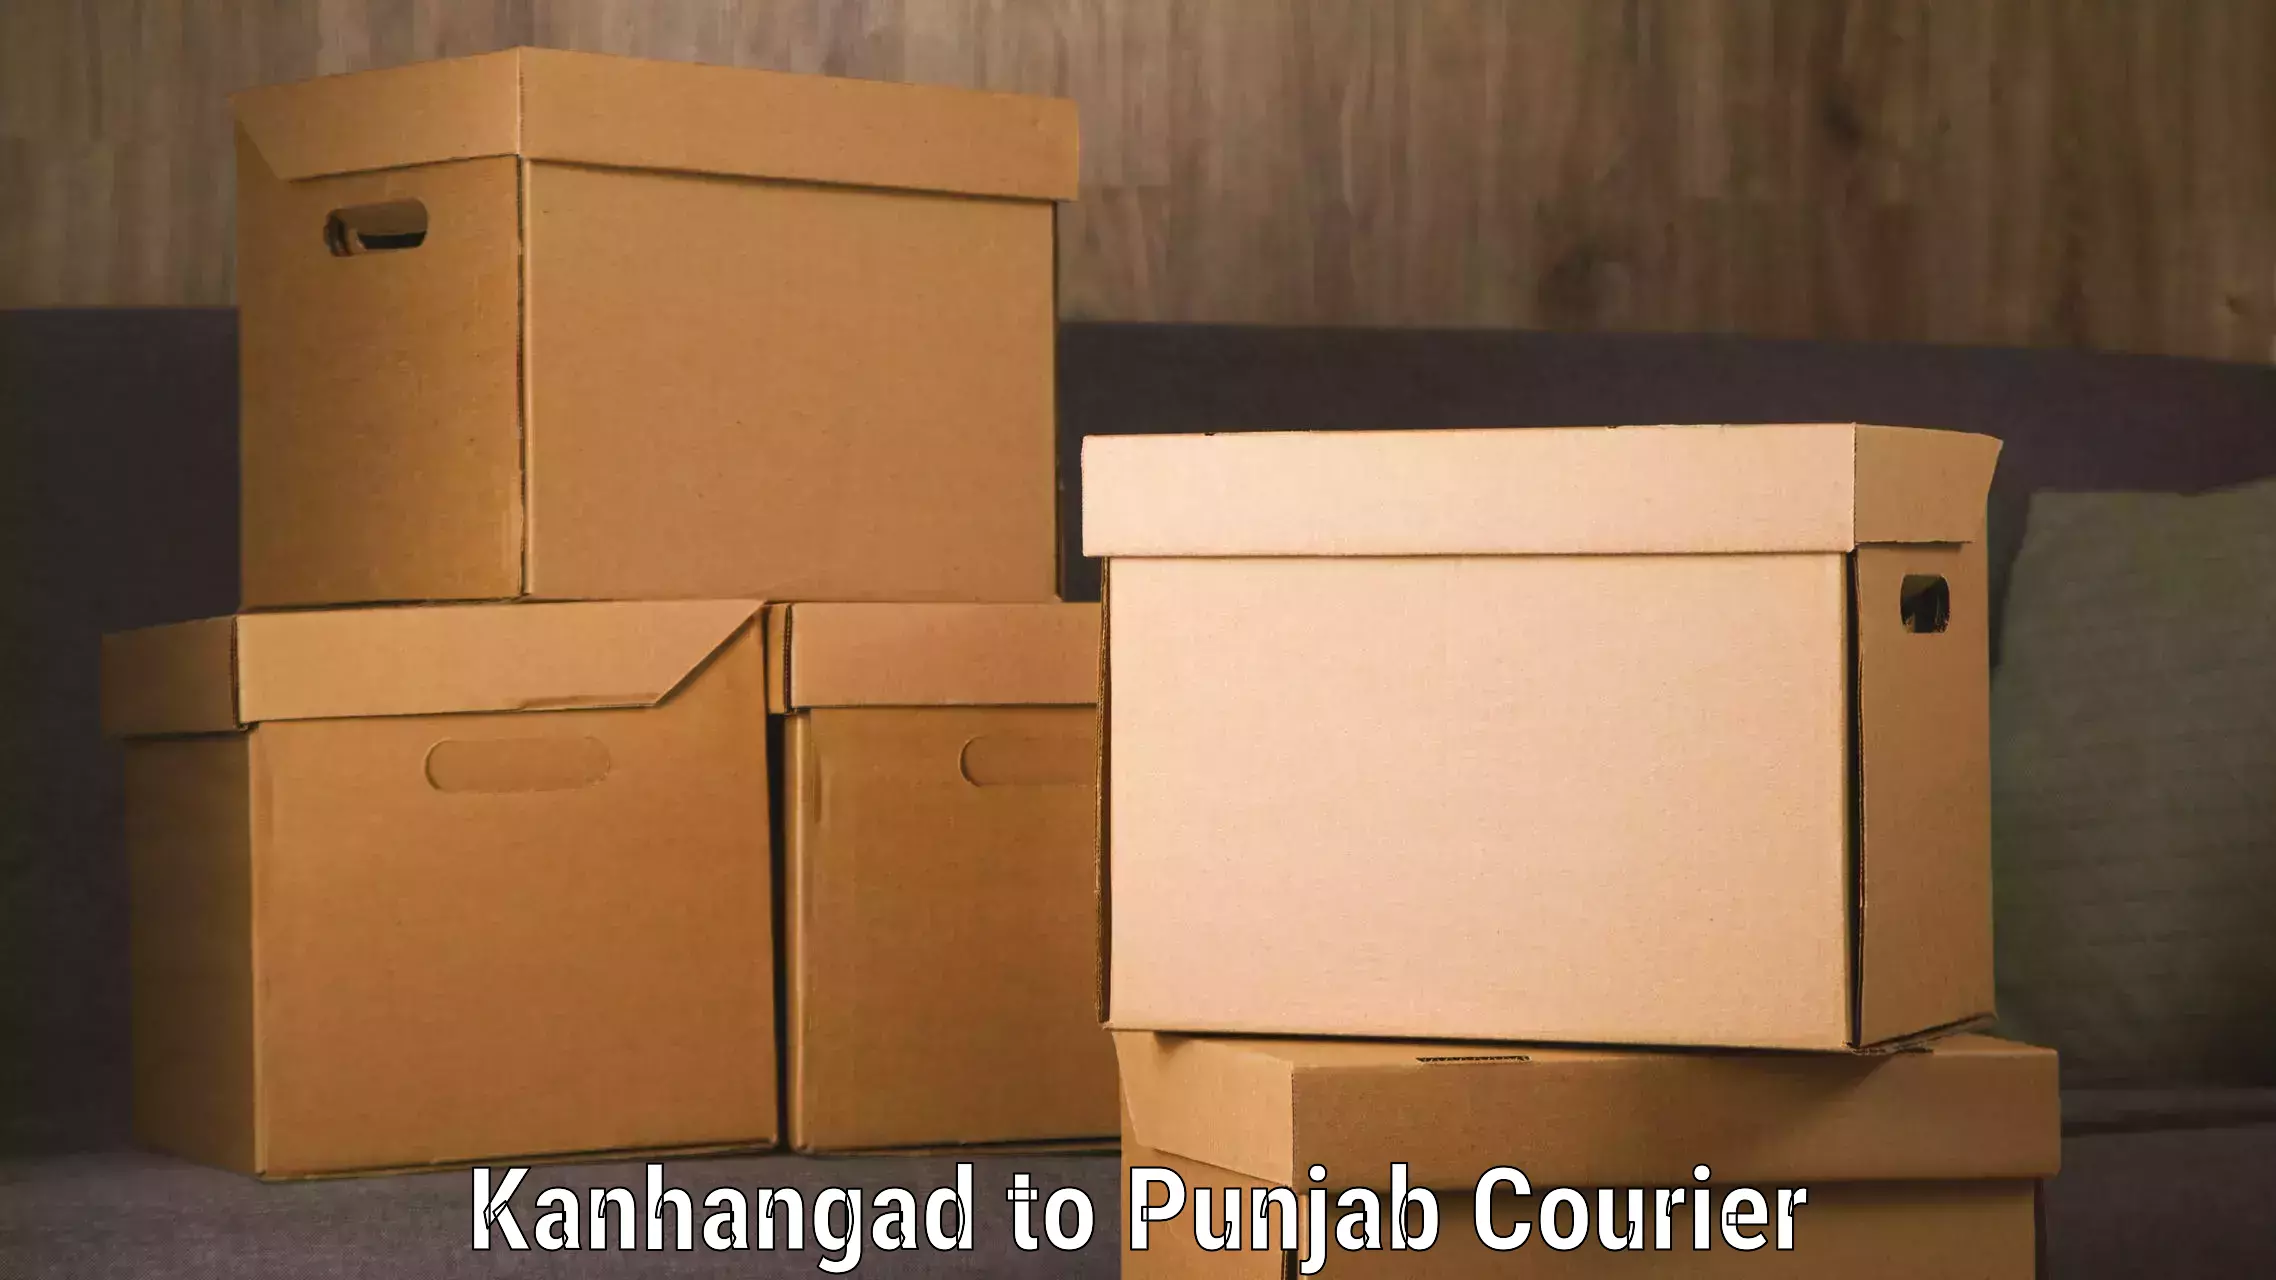 24-hour delivery options in Kanhangad to Punjab